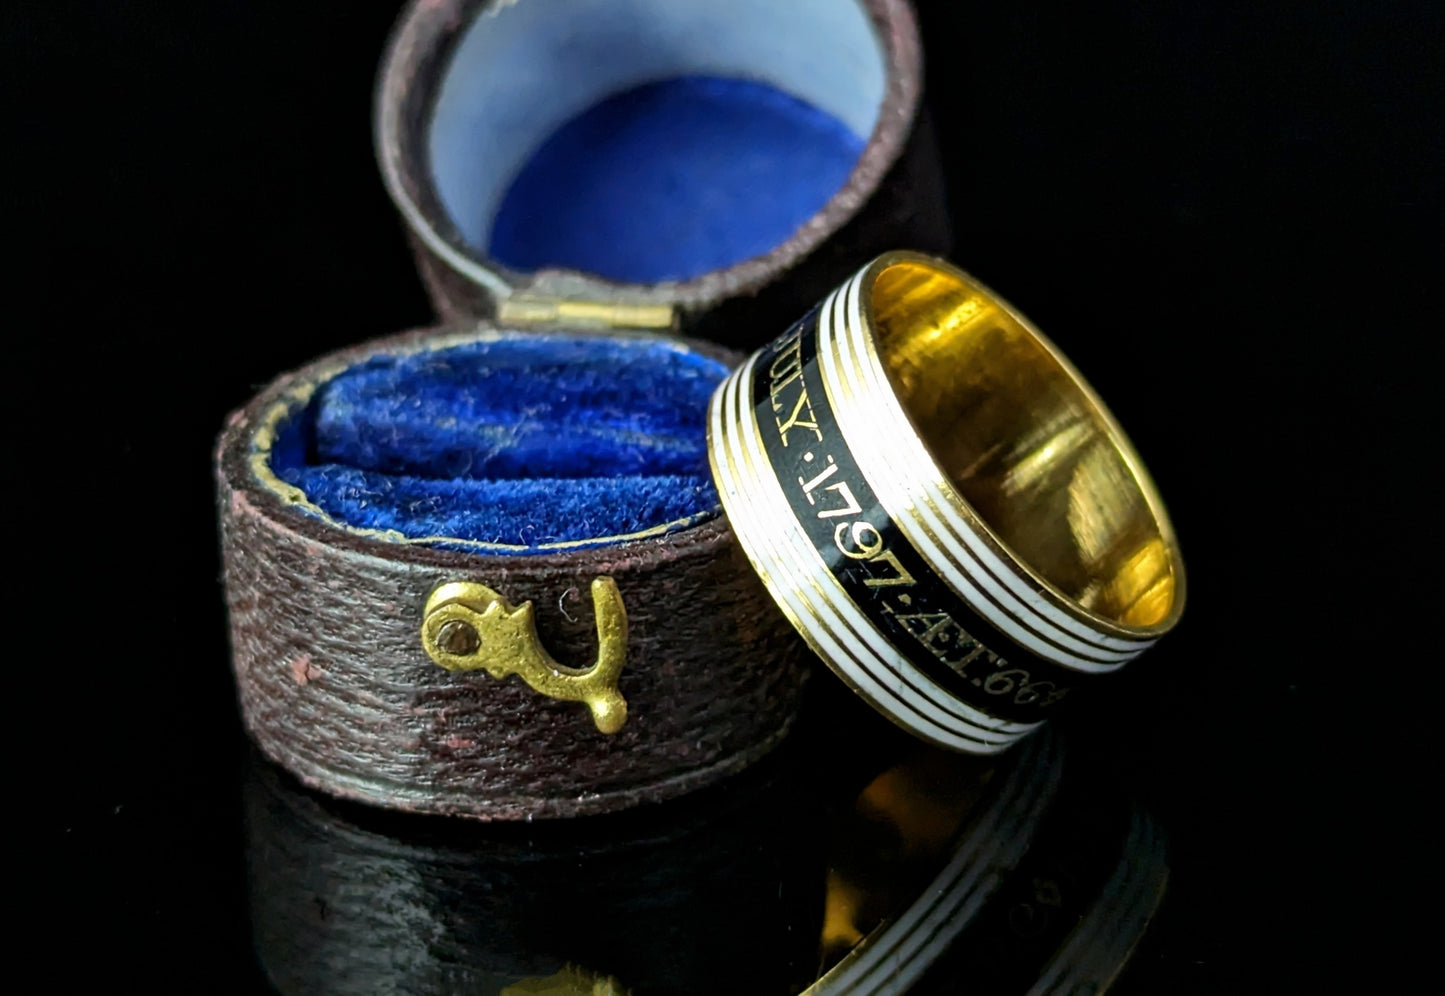 Antique Georgian mourning band ring, 22ct gold, Black and White Enamel, 18th century